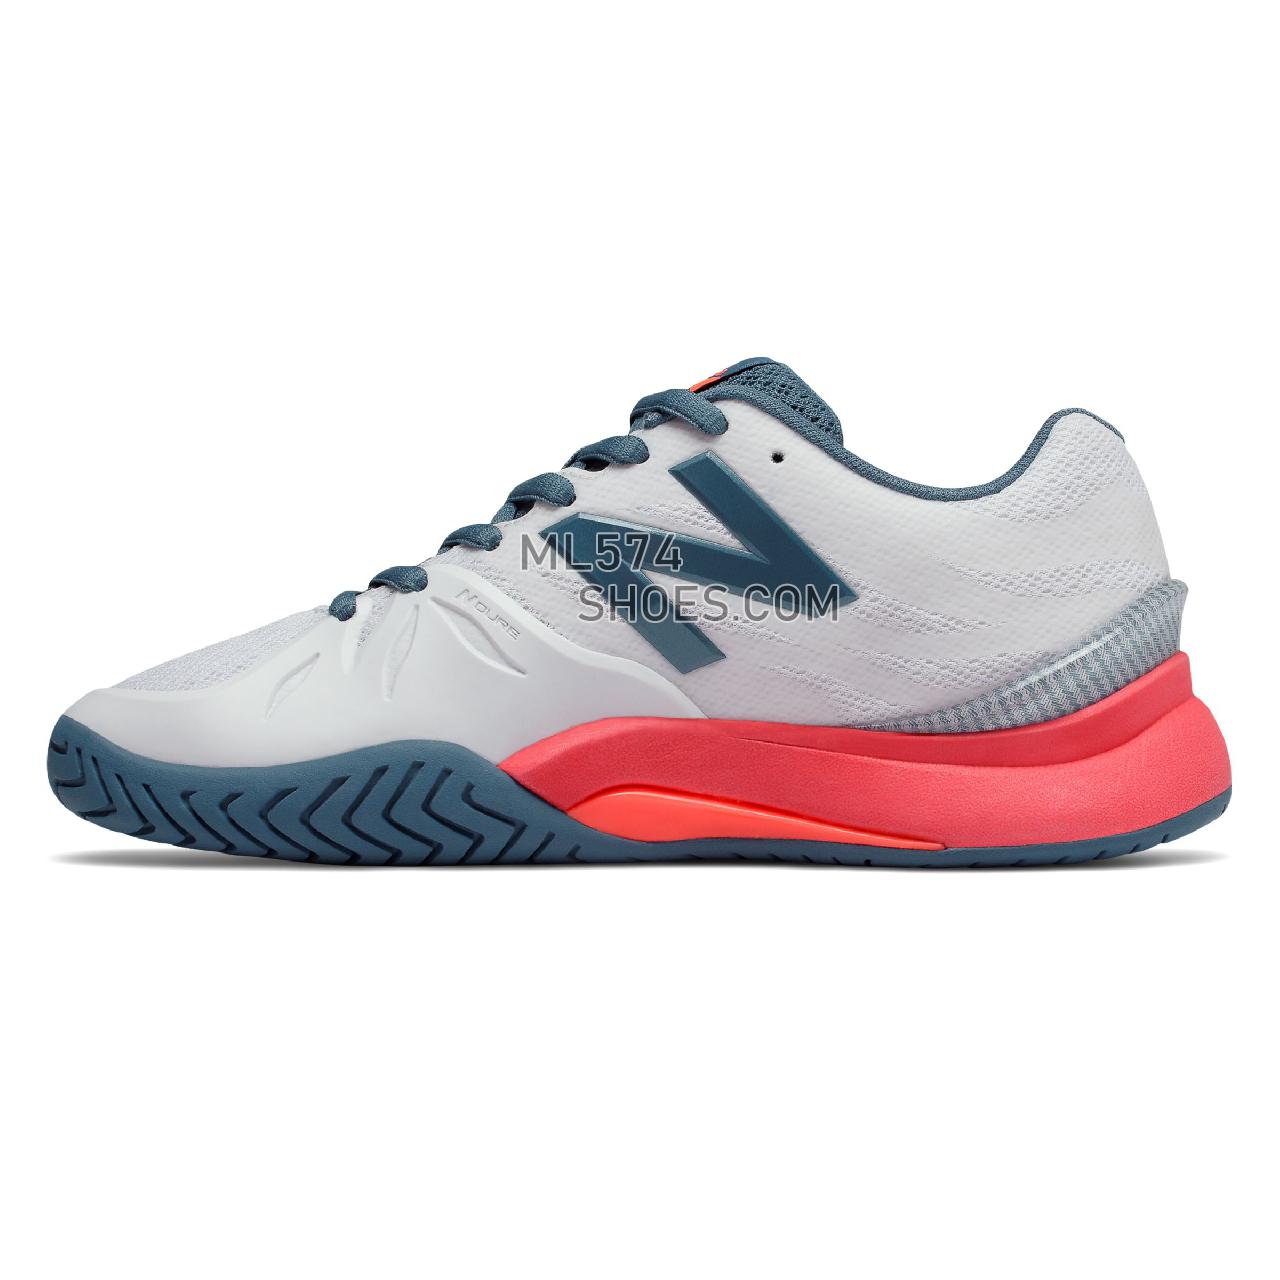 New Balance 1296v2 - Women's 1296 - Tennis / Court White with Dragonfly - WCH1296D